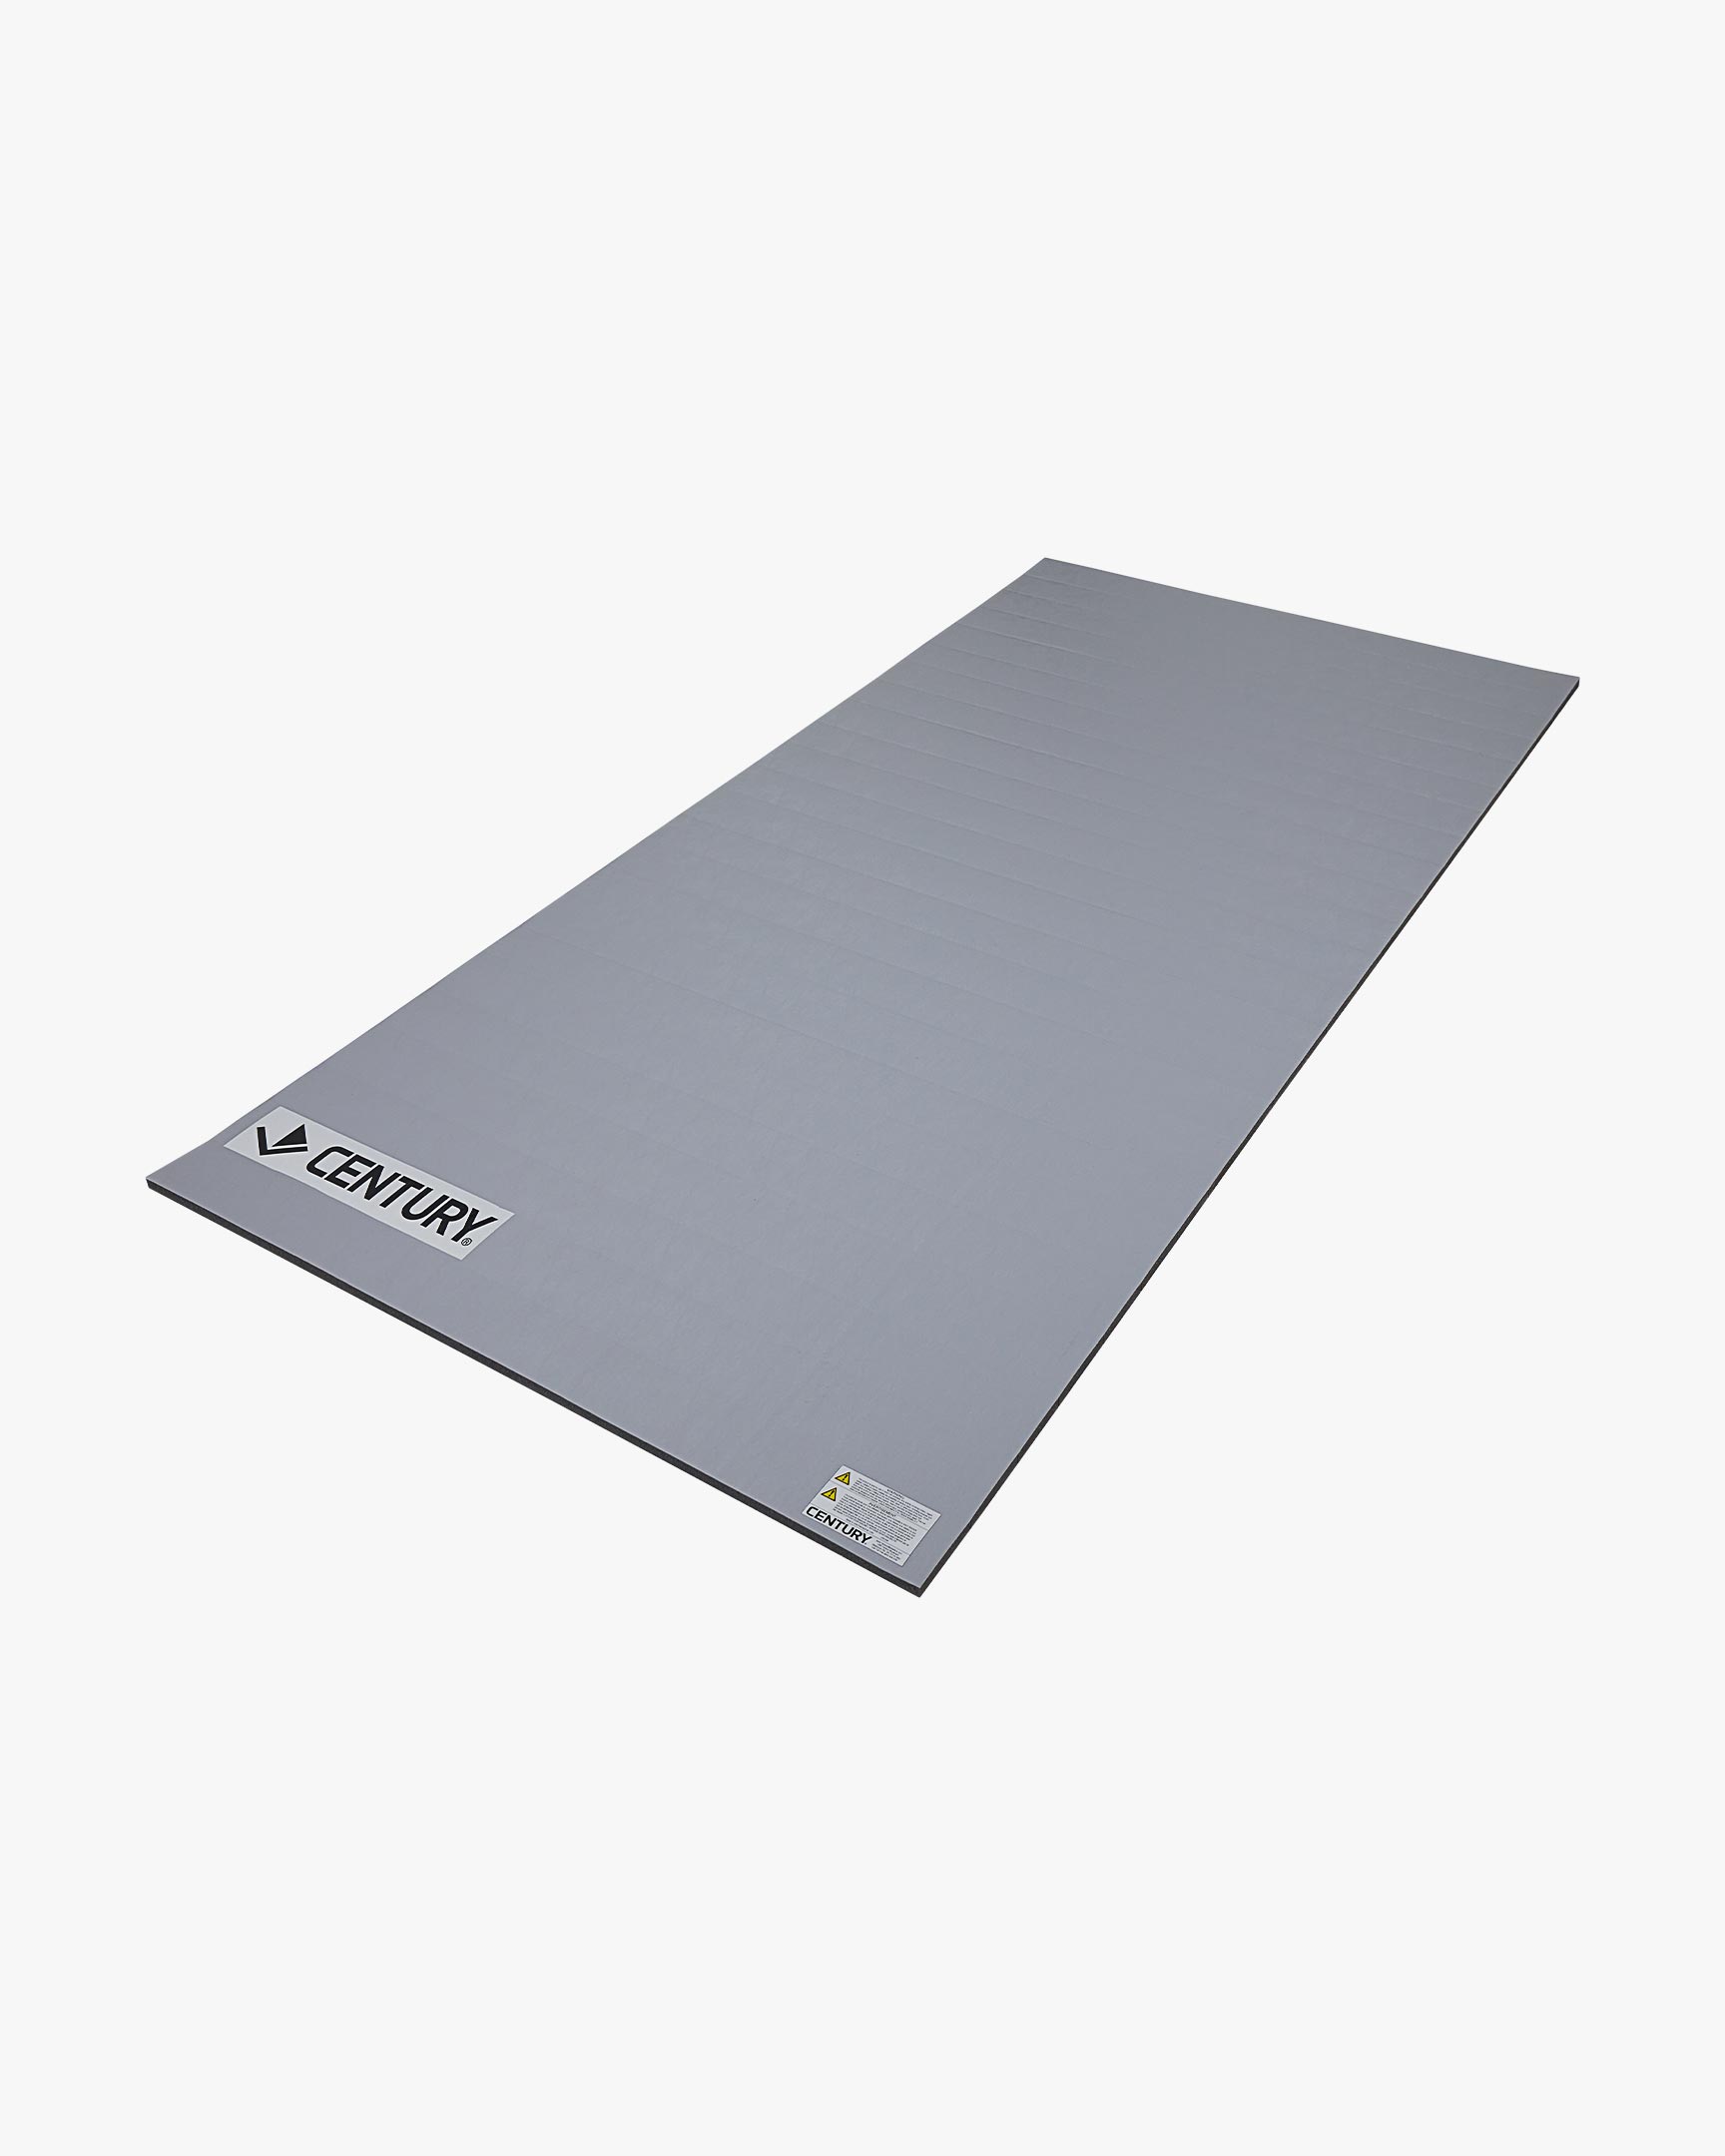 Home Rollout Mat - 4ft x 8ft x .8in